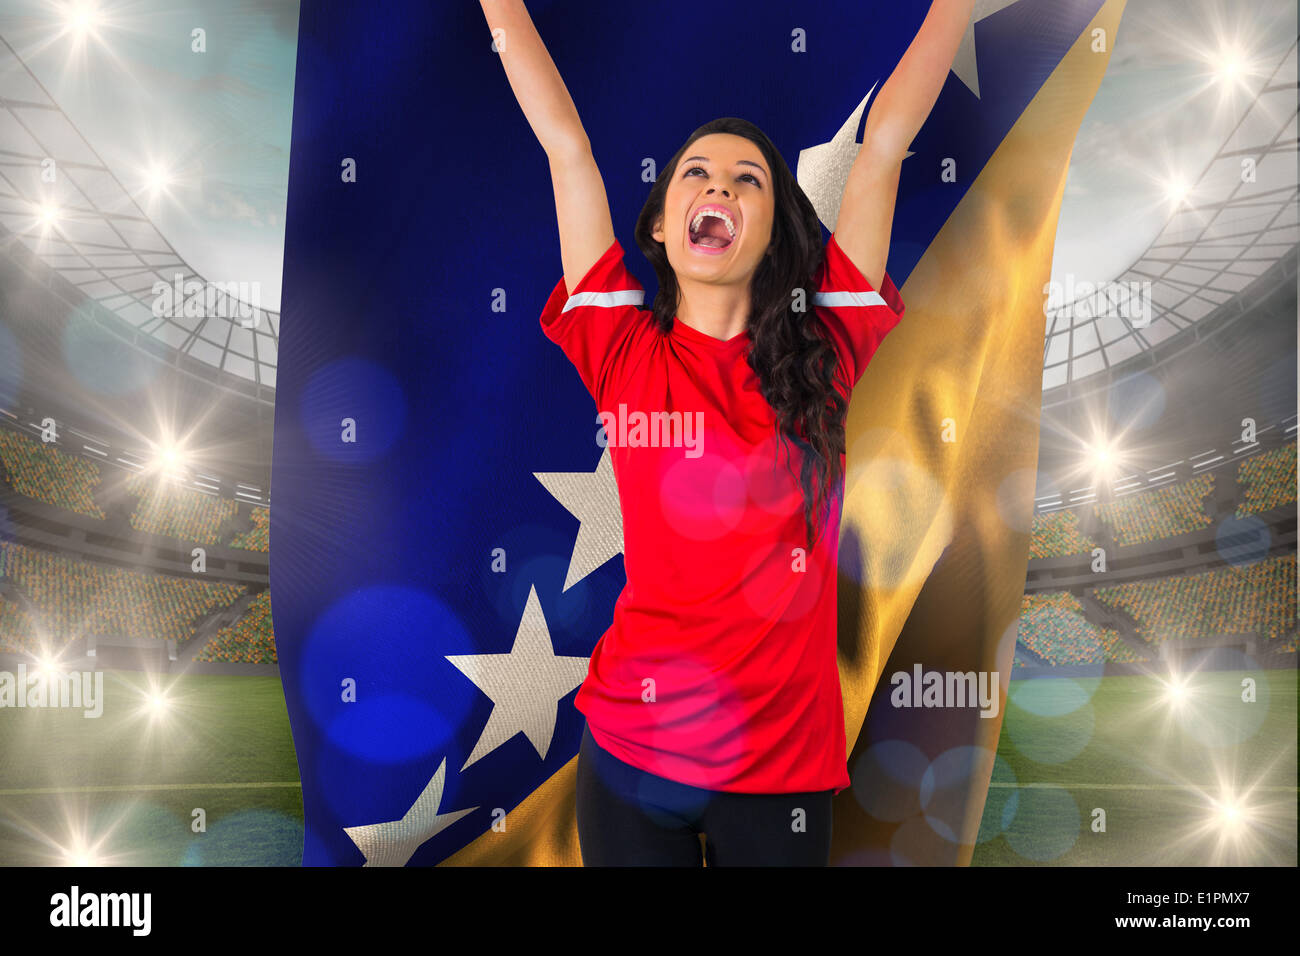 Composite image of cheering football fan in red holding bosnian flag Stock Photo